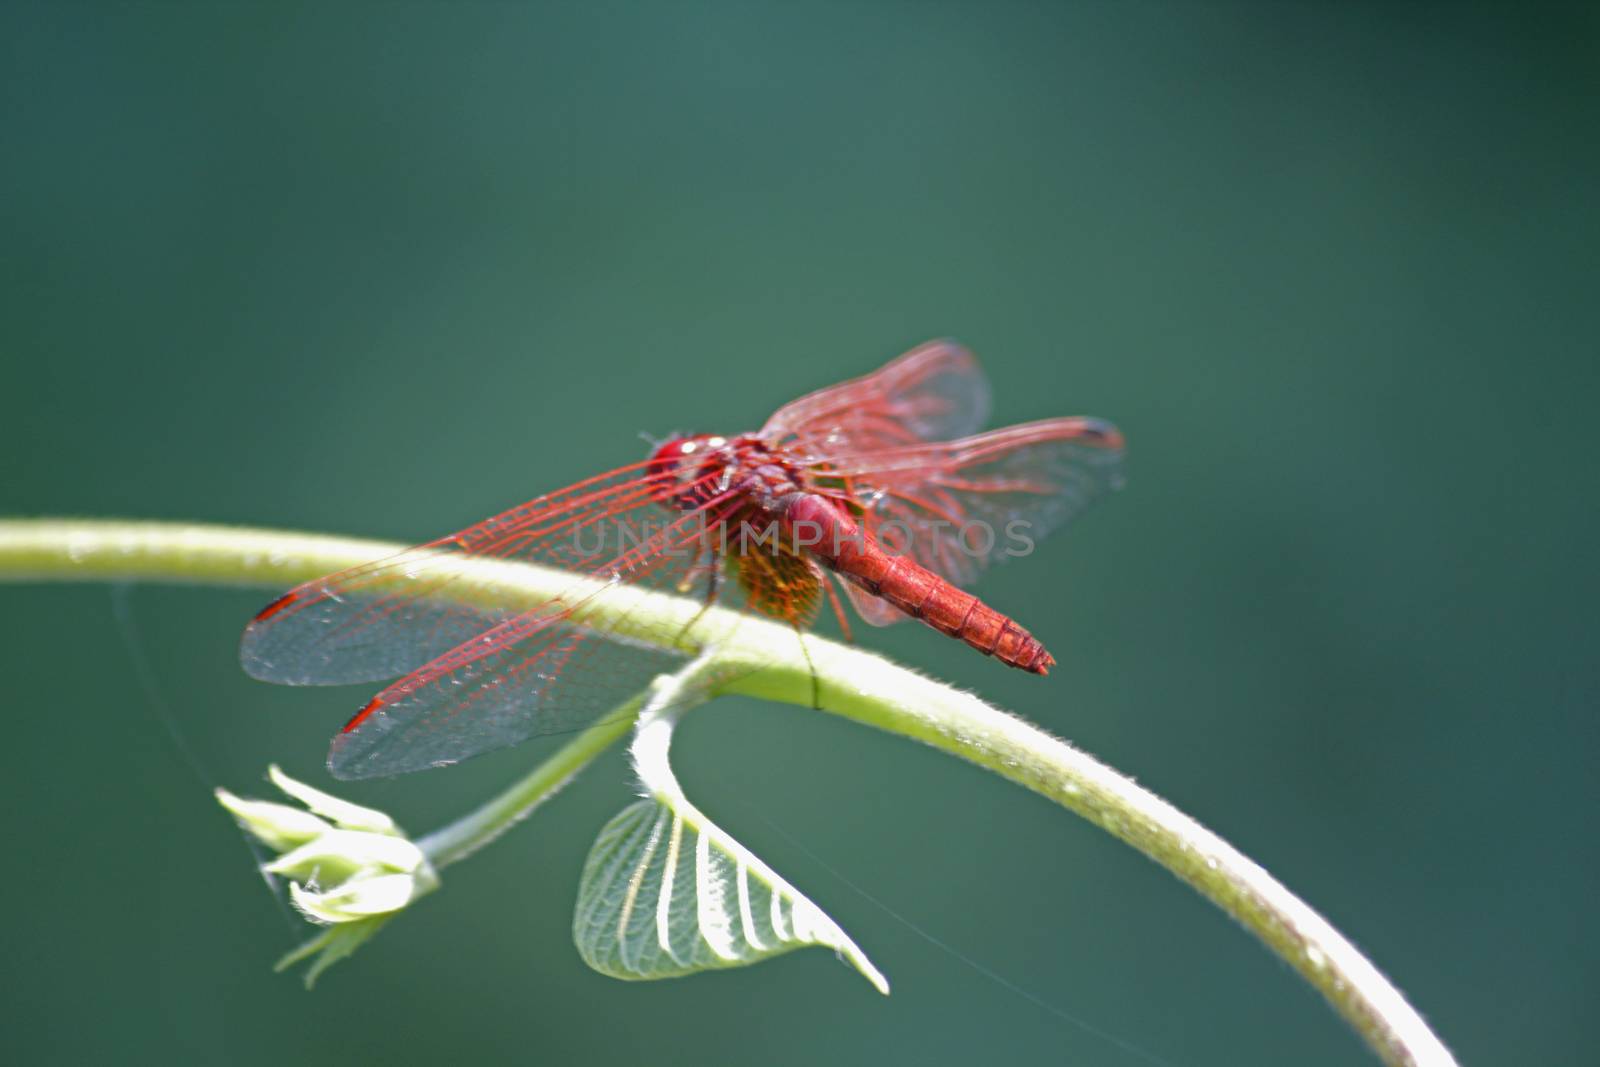 Scarlet dragonfly, Crocothemis erythraea. The adult male Scarlet Dragonfly has a bright red, widened abdomen, and small amber patches at the bases of the hindwings. Females and immatures are yellow-brown and have a conspicuous pale stripe along the top of the thorax.